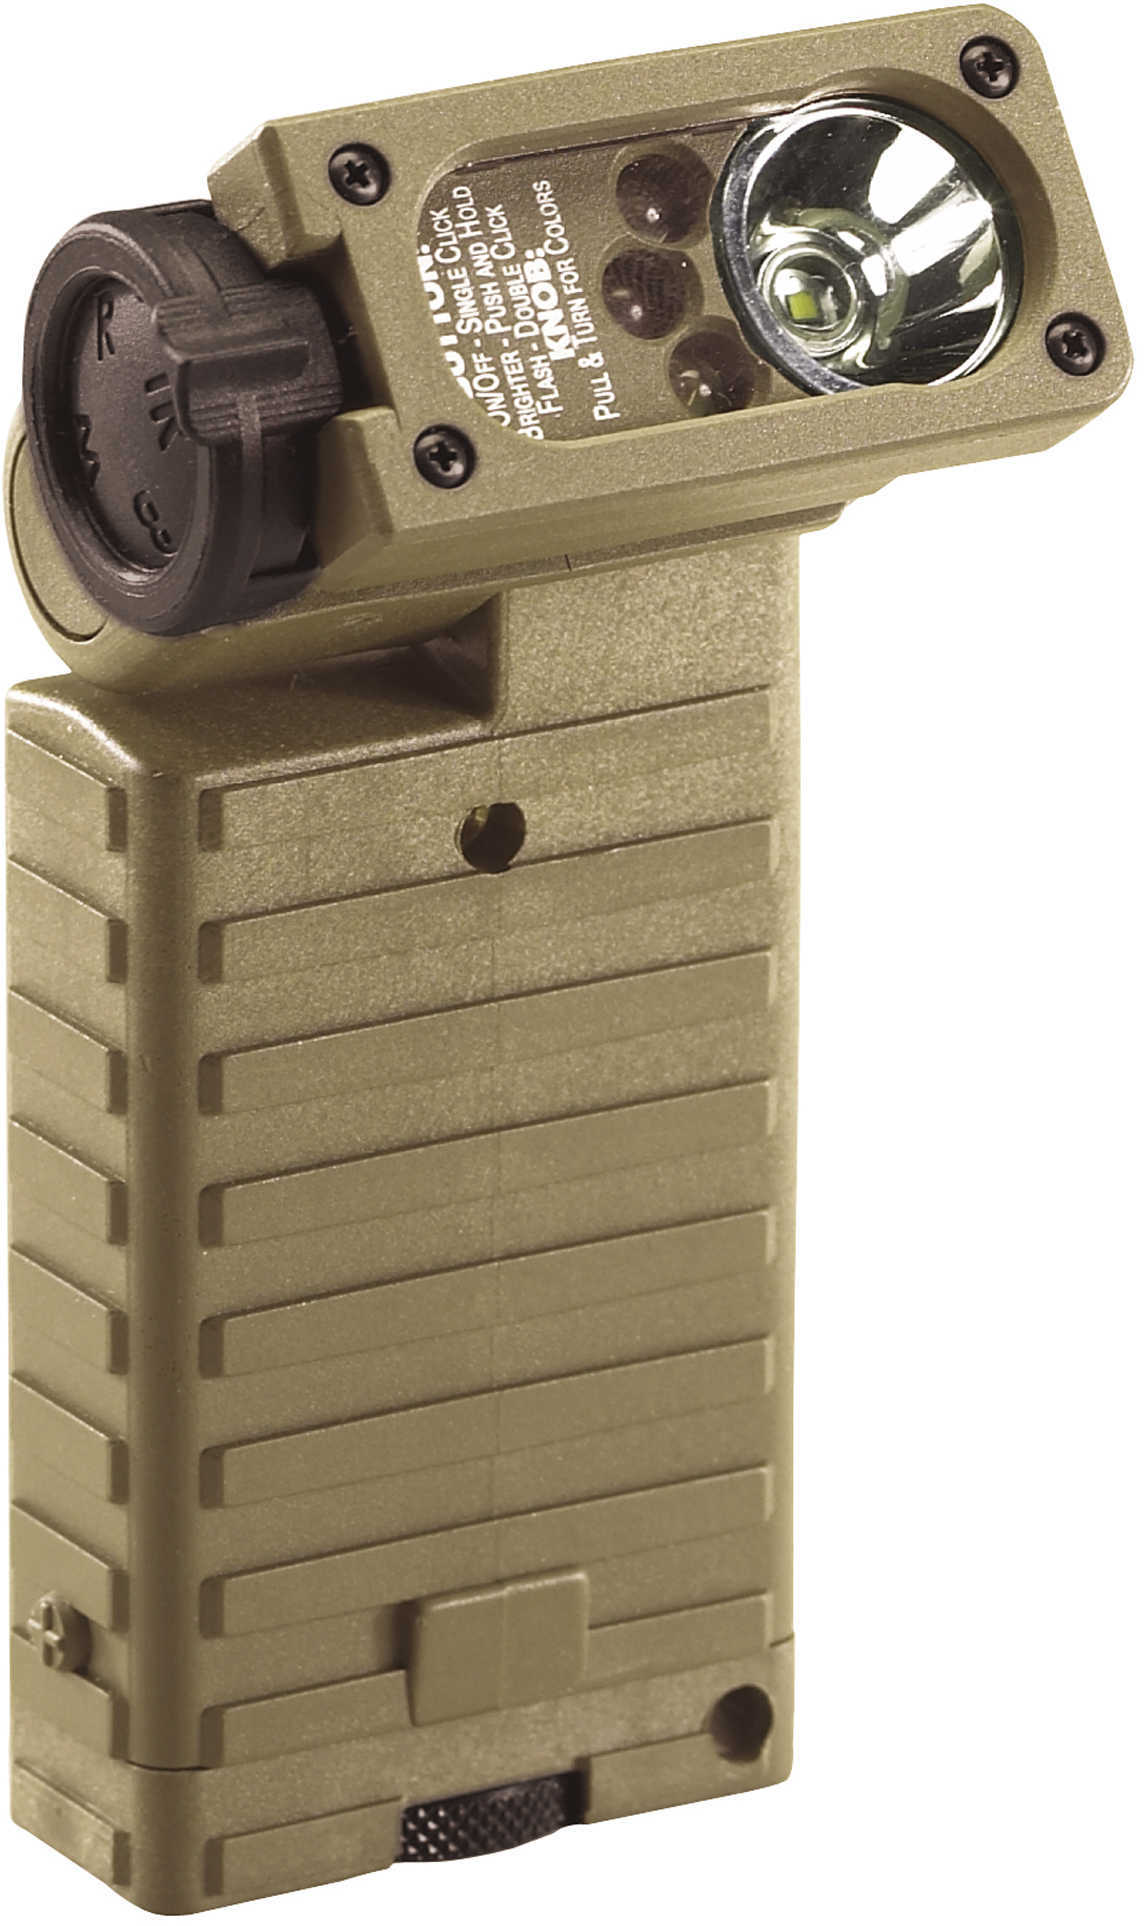 Streamlight Sidewinder Flashlight IR LED in Coyote Tactical Military